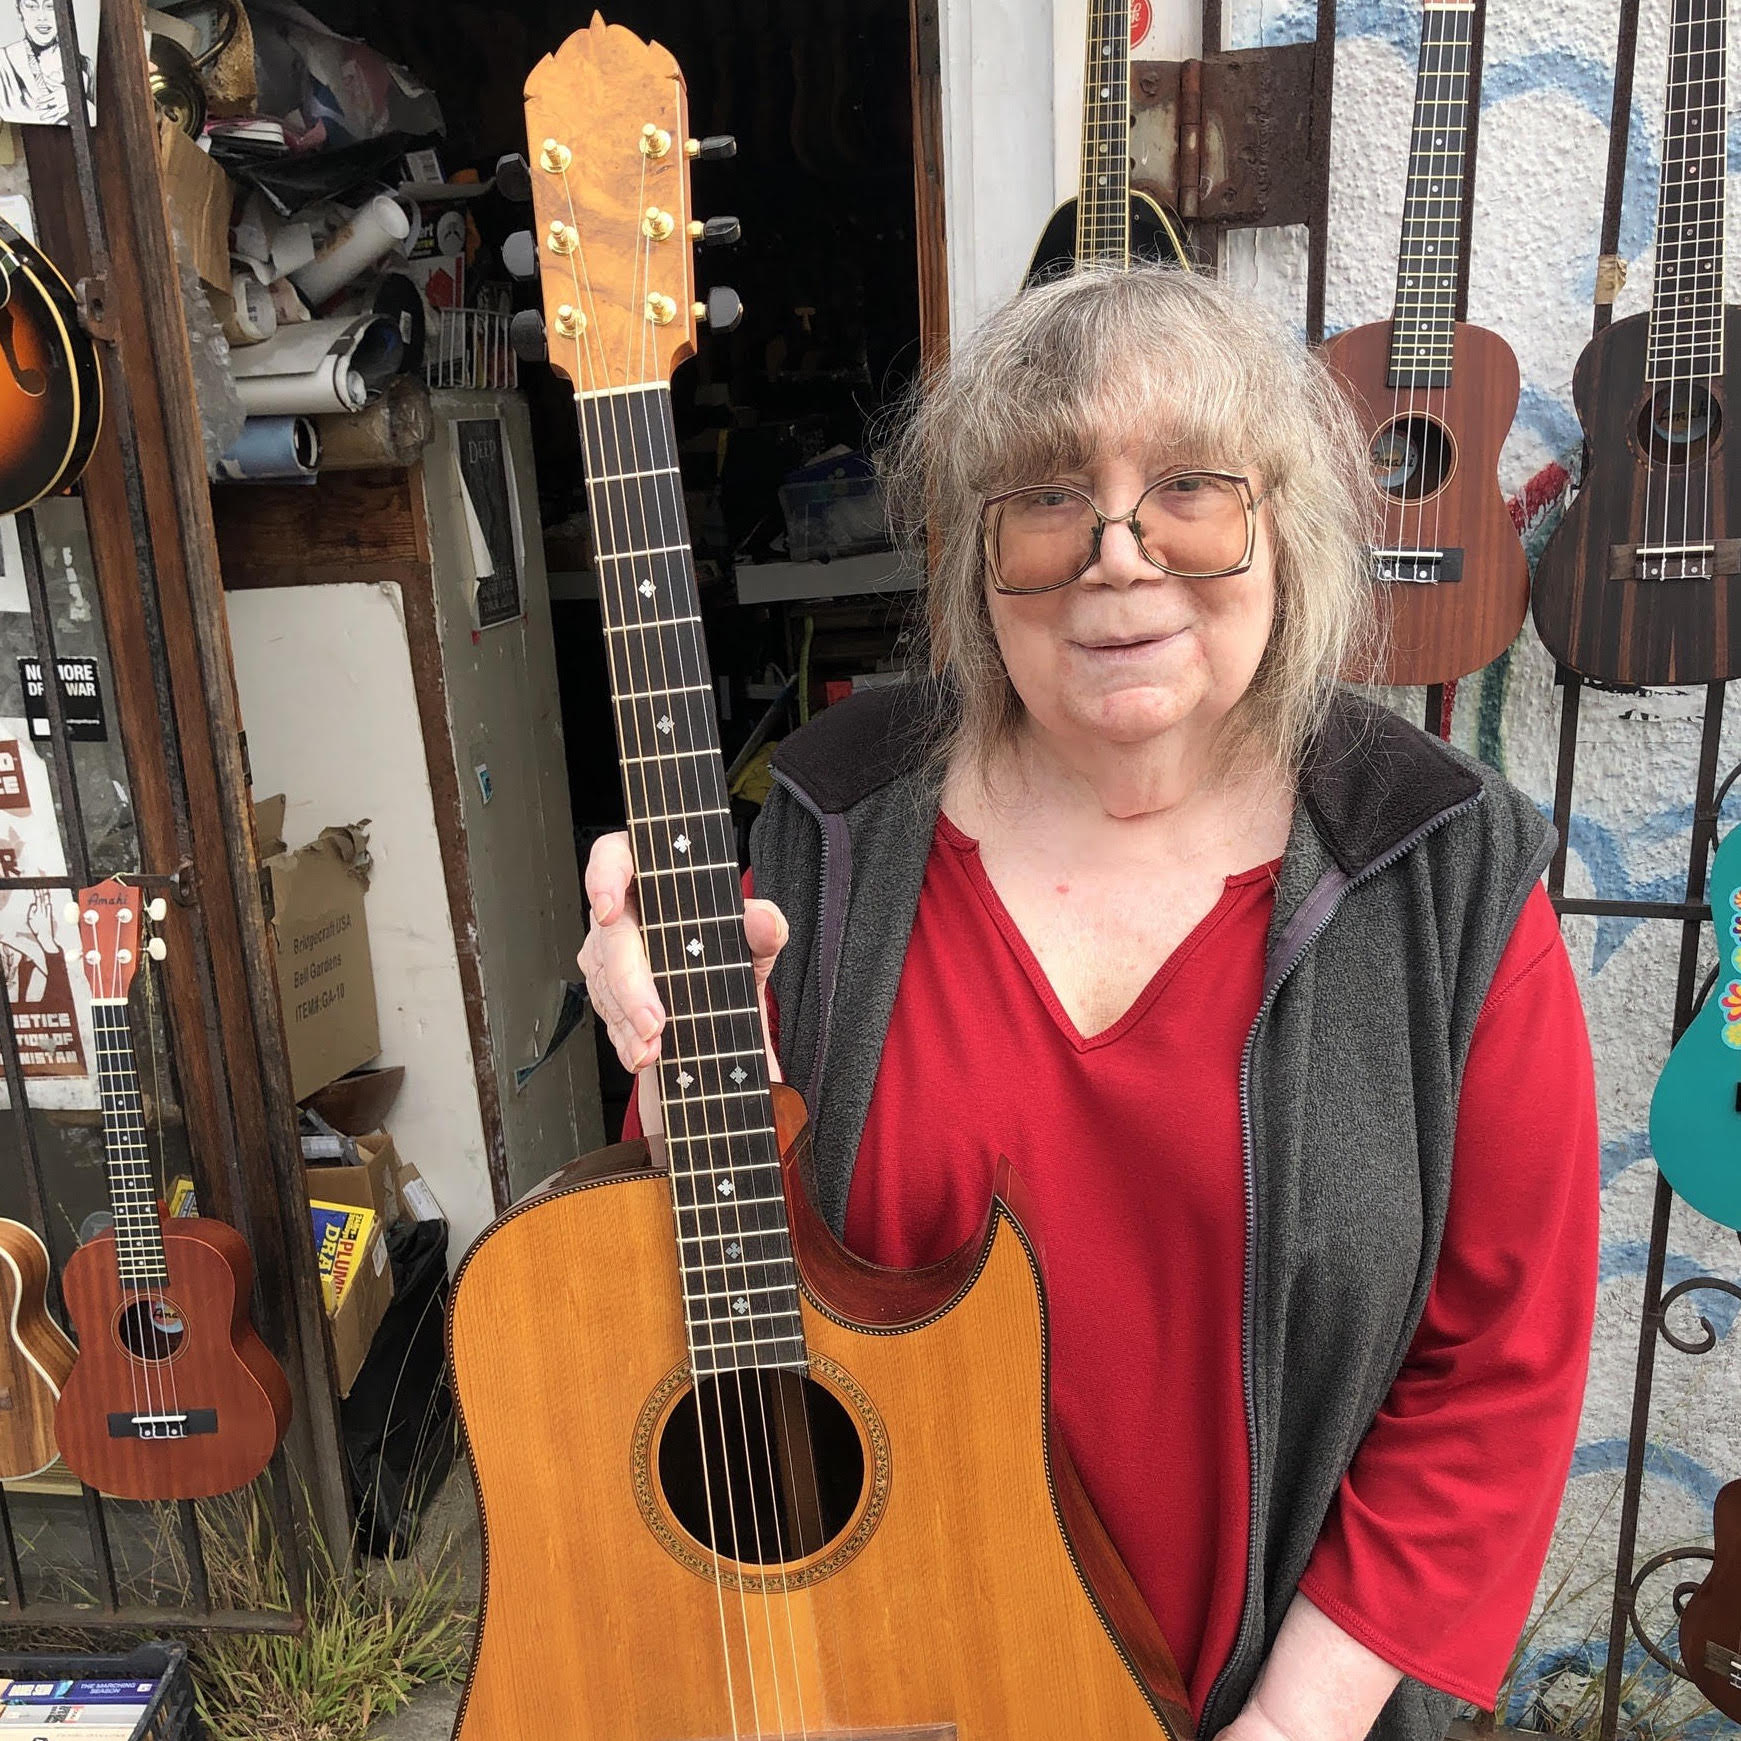 Local musician, Lynda Carson, standing in a doorway holding an acoustic guitar.